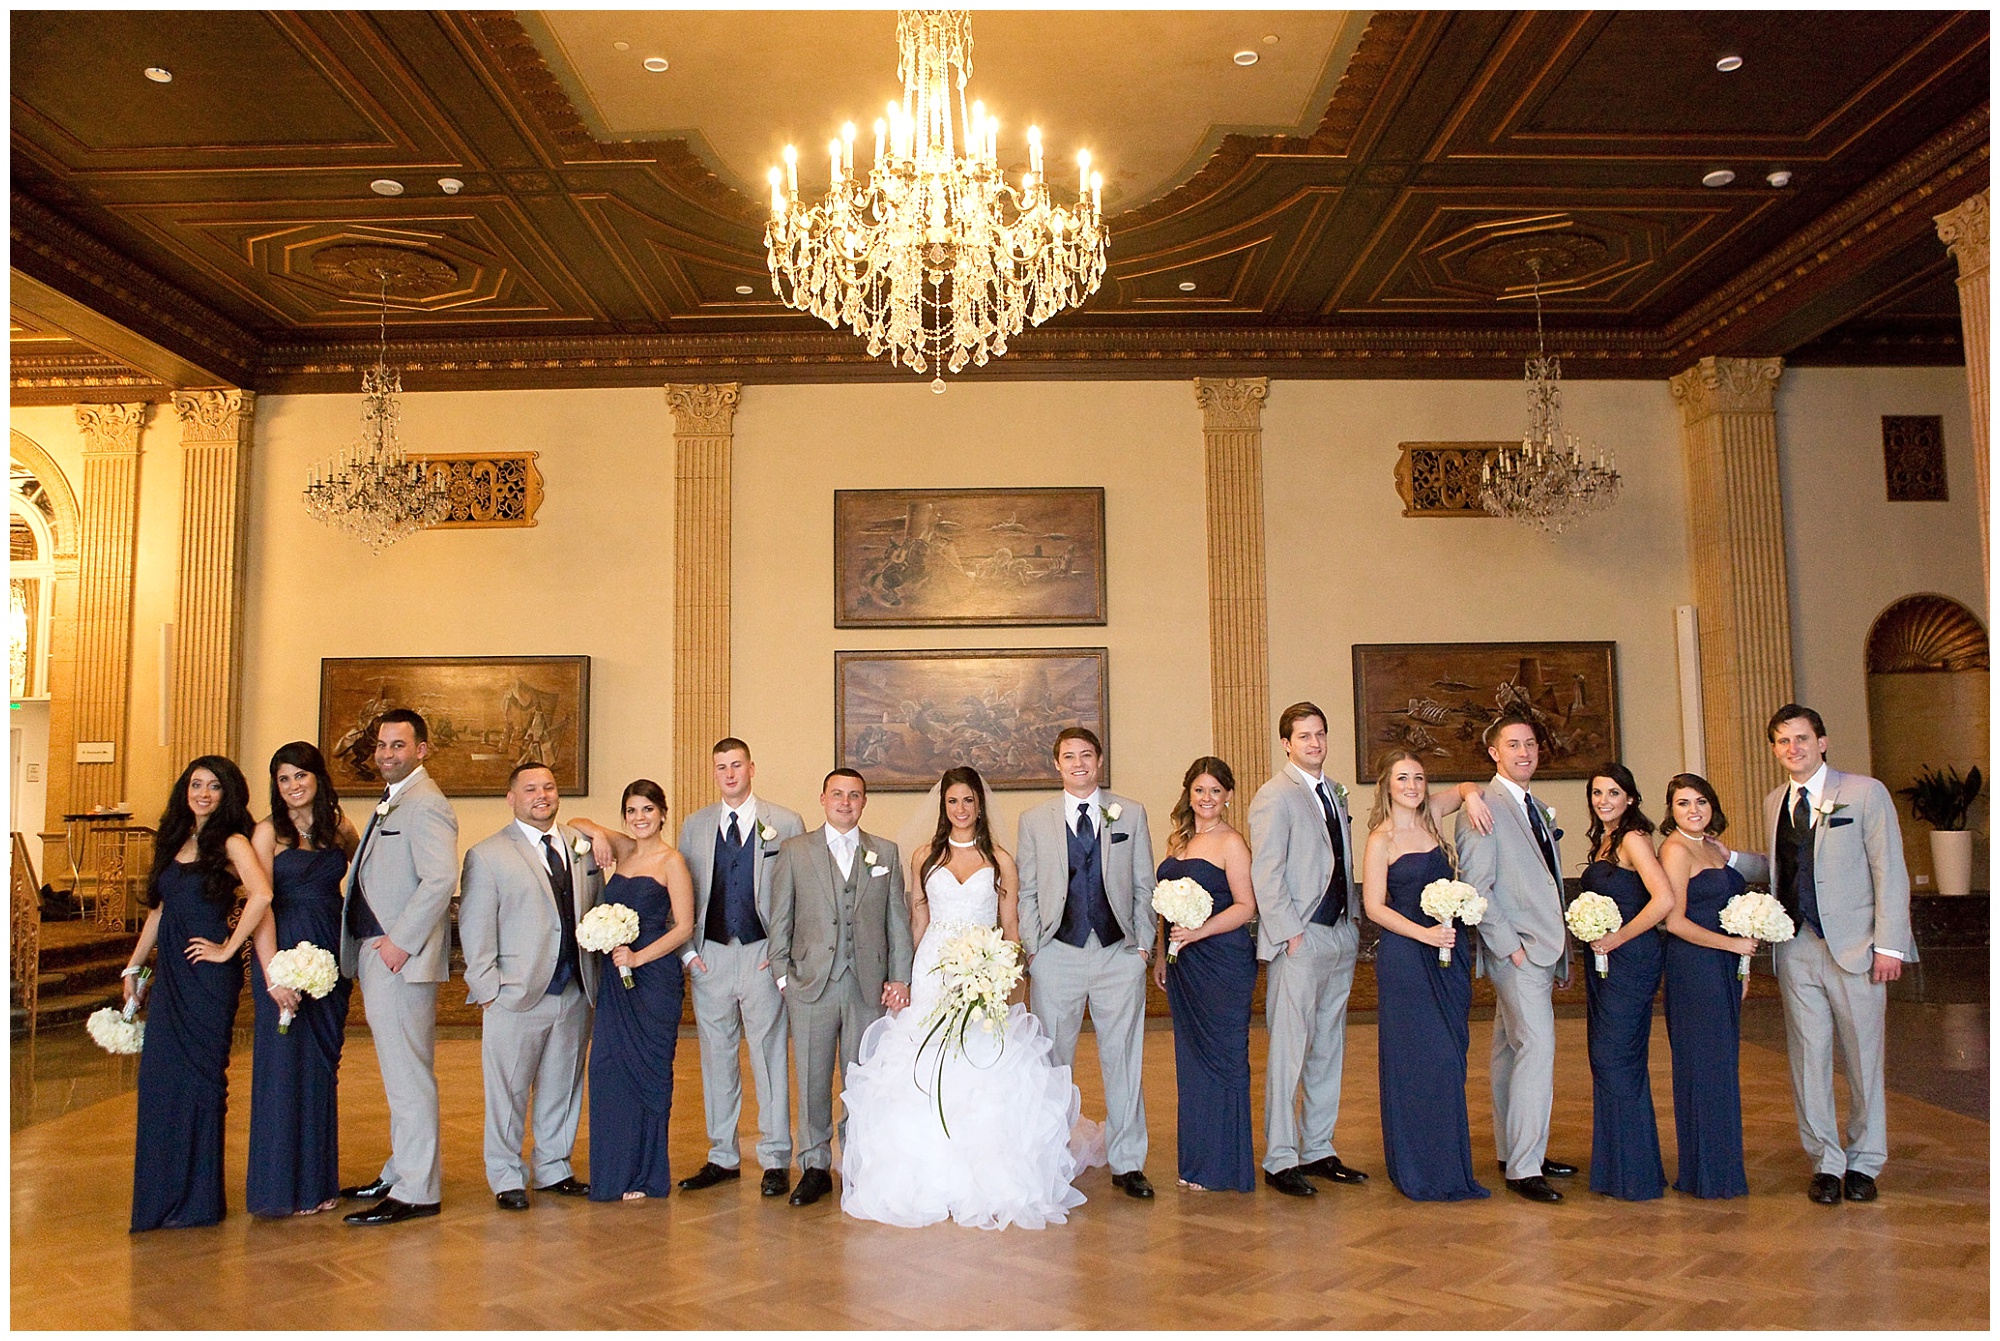 Photo of the wedding party in a editorial styled group portrait.